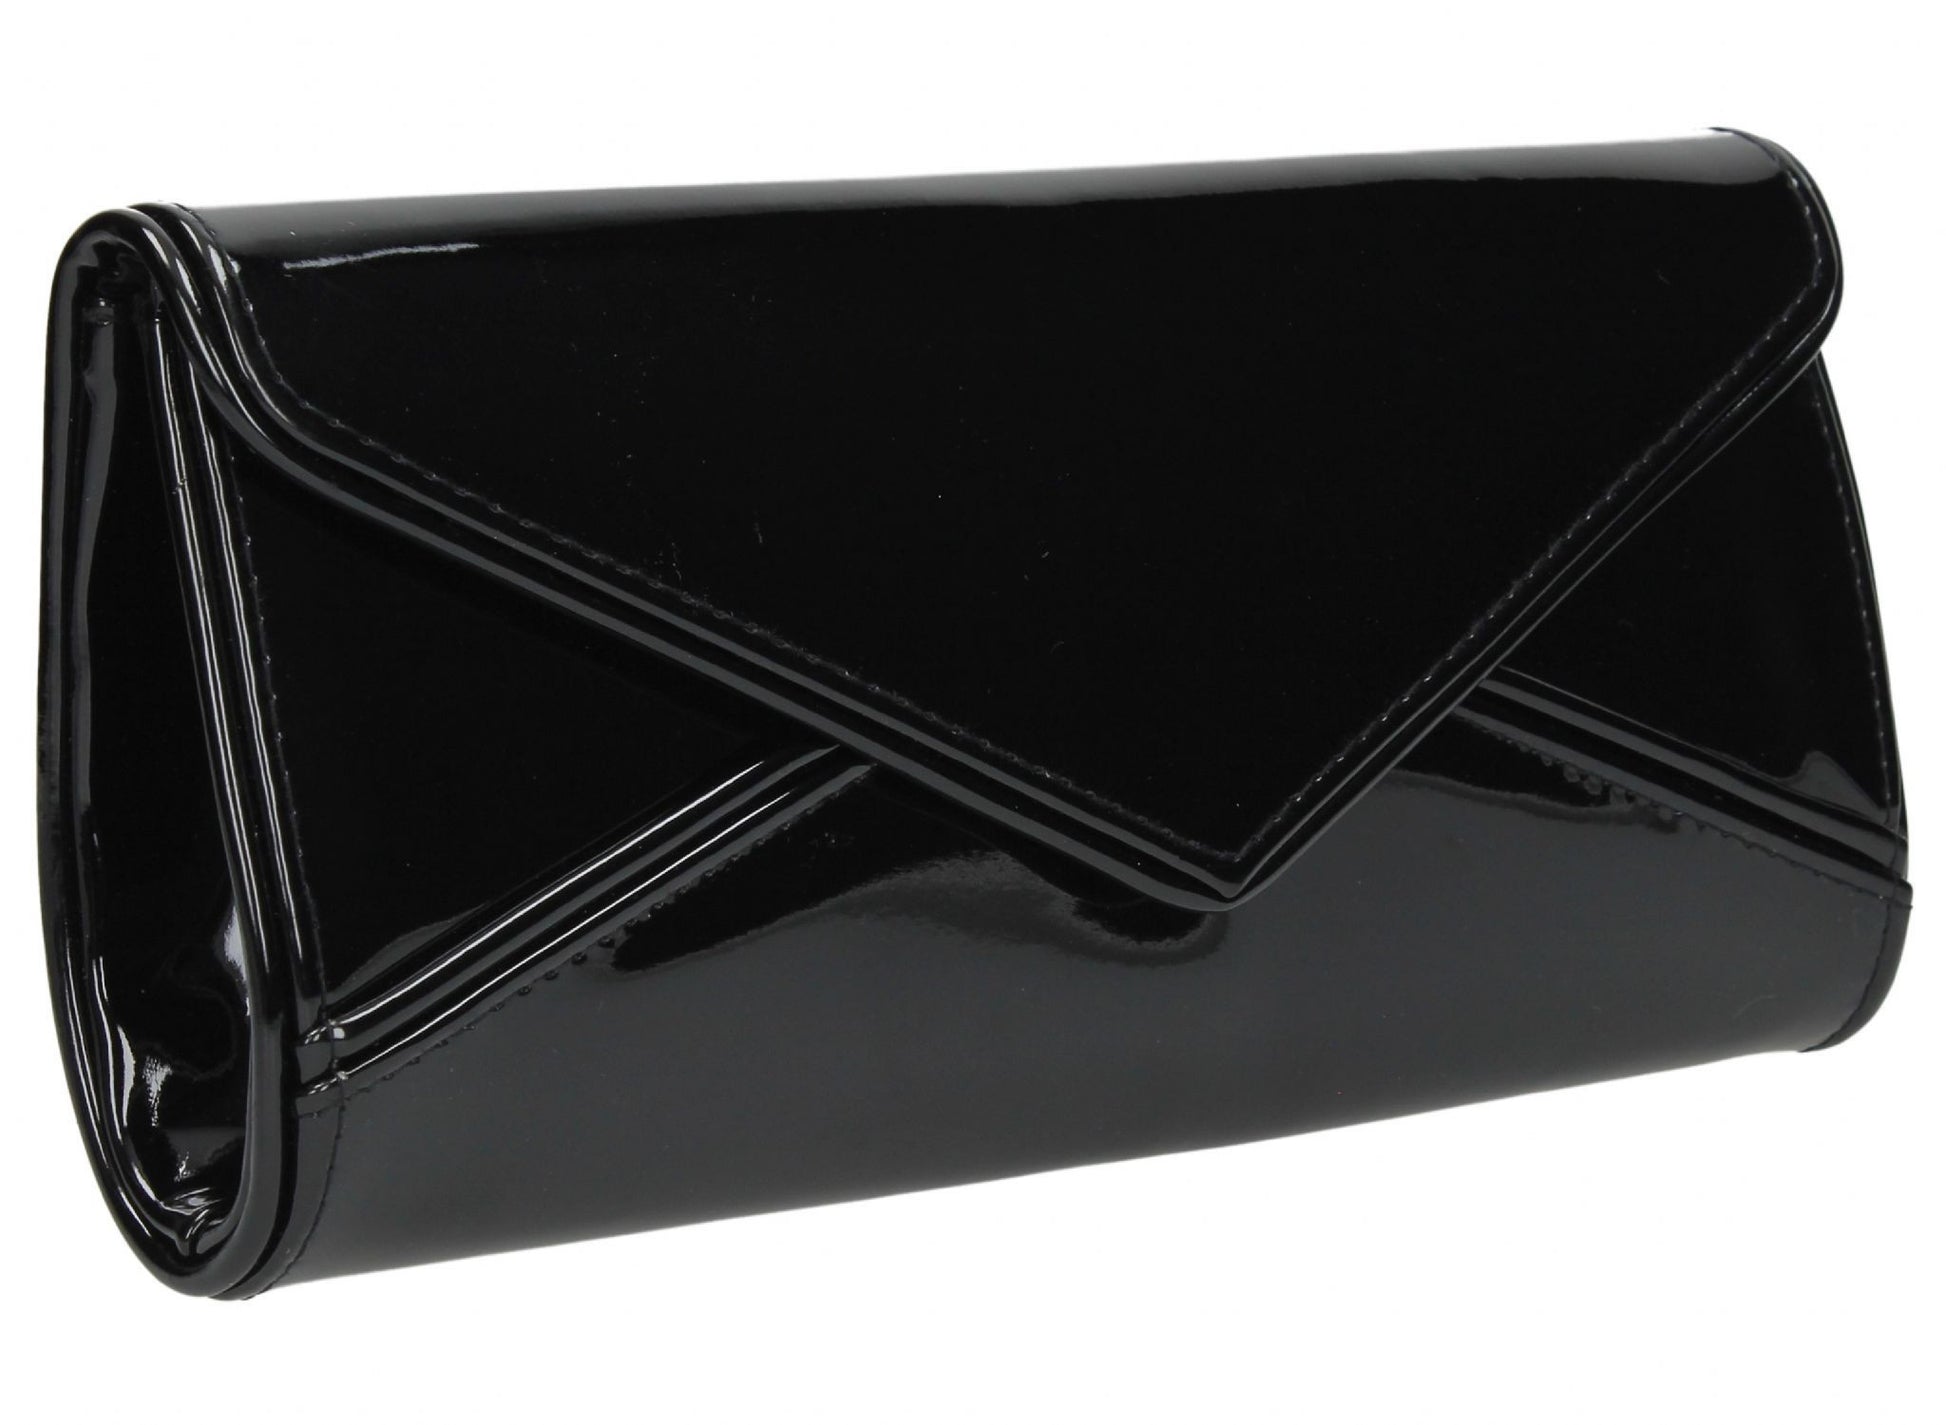 SWANKYSWANS Perry Patent Clutch Bag - Black Cute Cheap Clutch Bag For Weddings School and Work